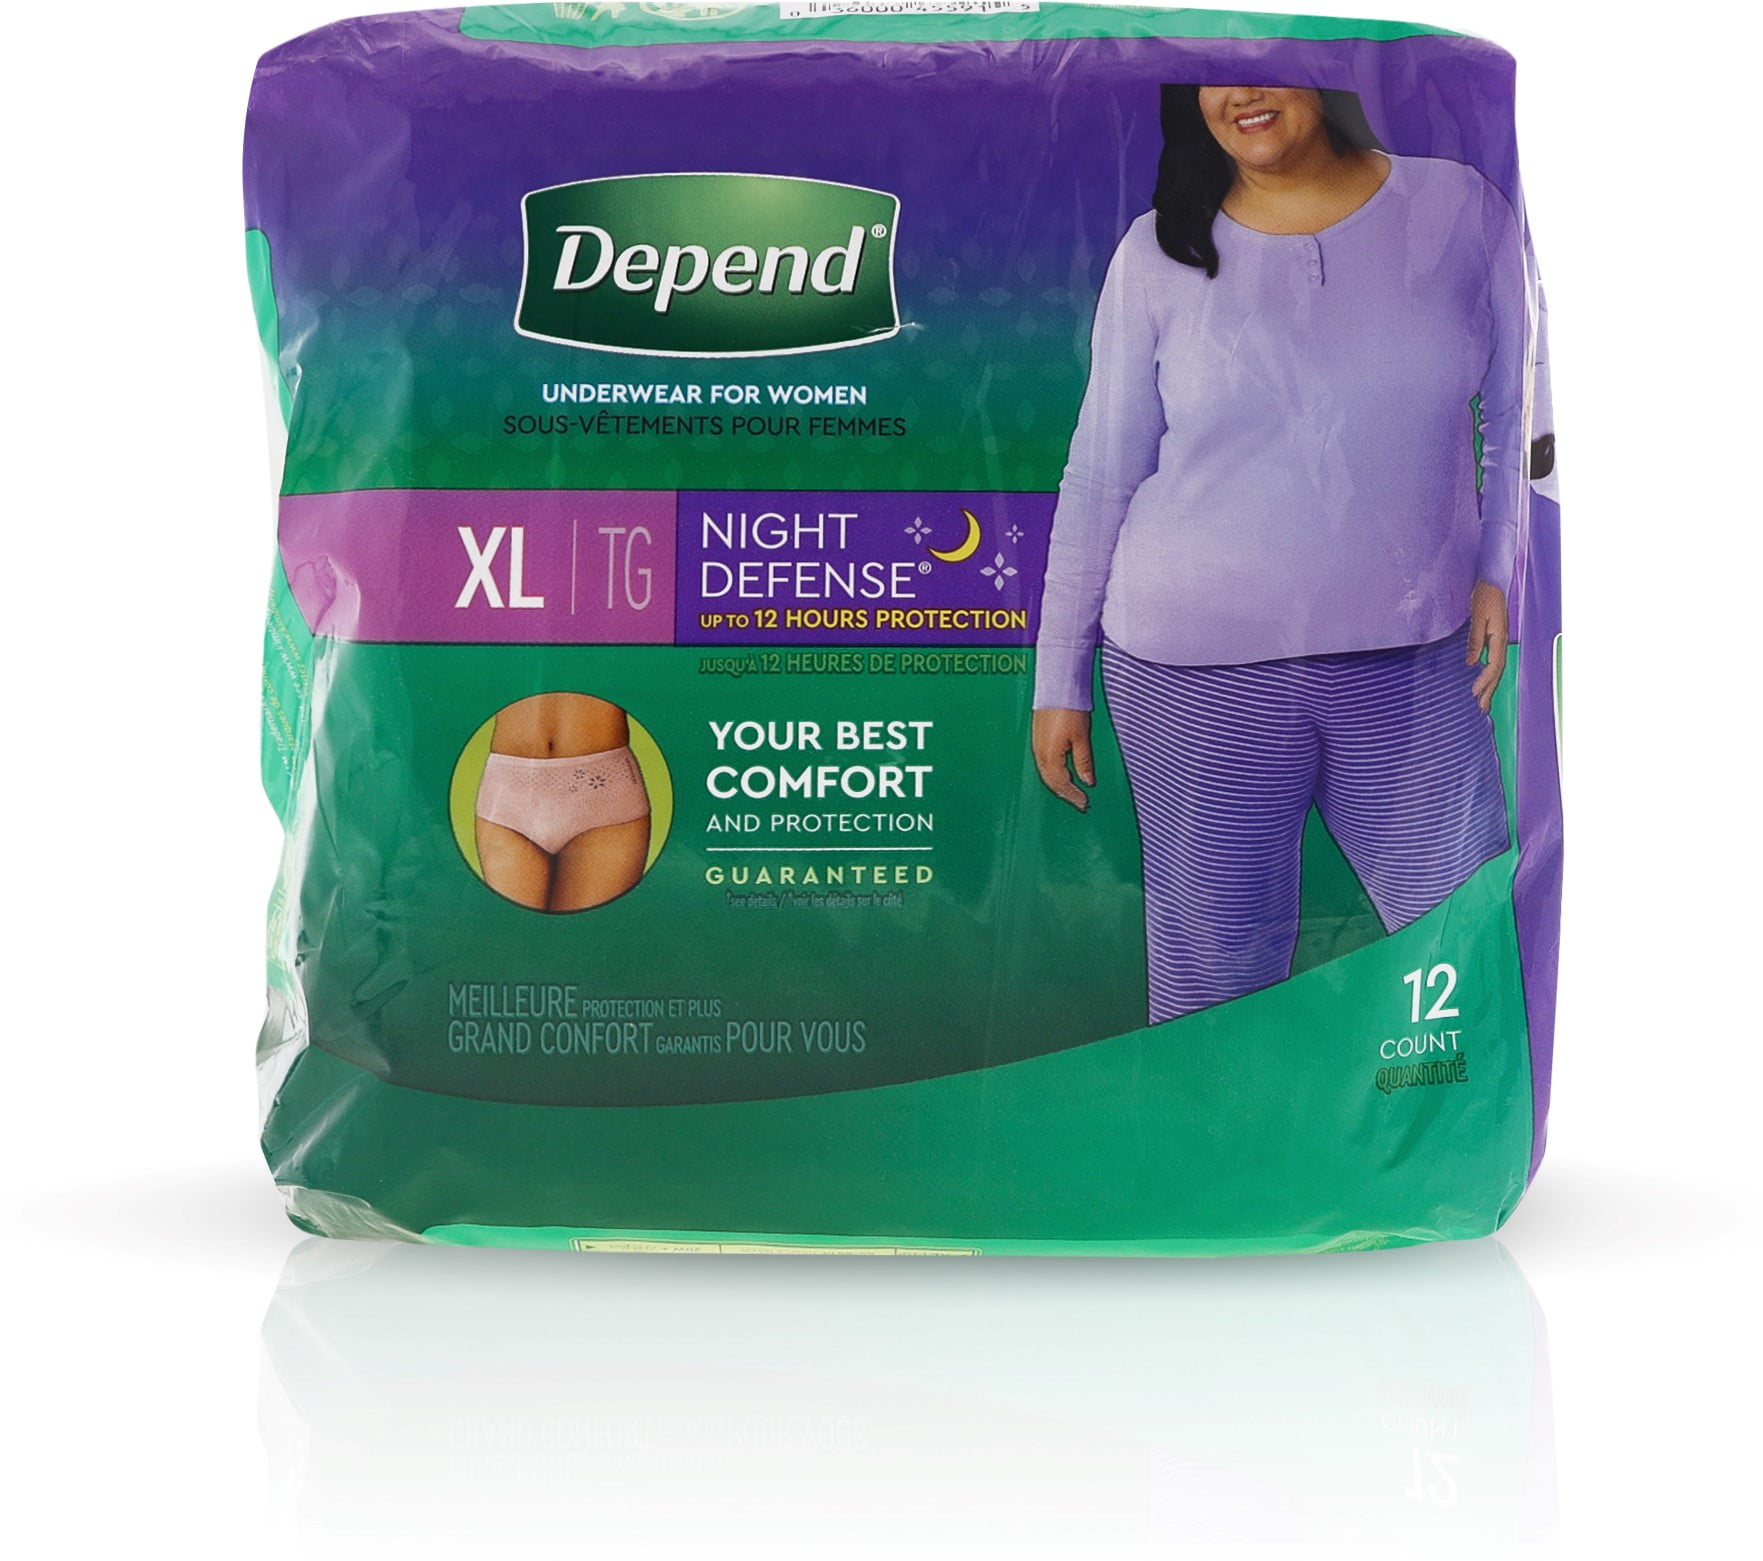 Depend Night Defense Incontinence Overnight Underwear for Women, XL - 12 ea  (Pack of 3)